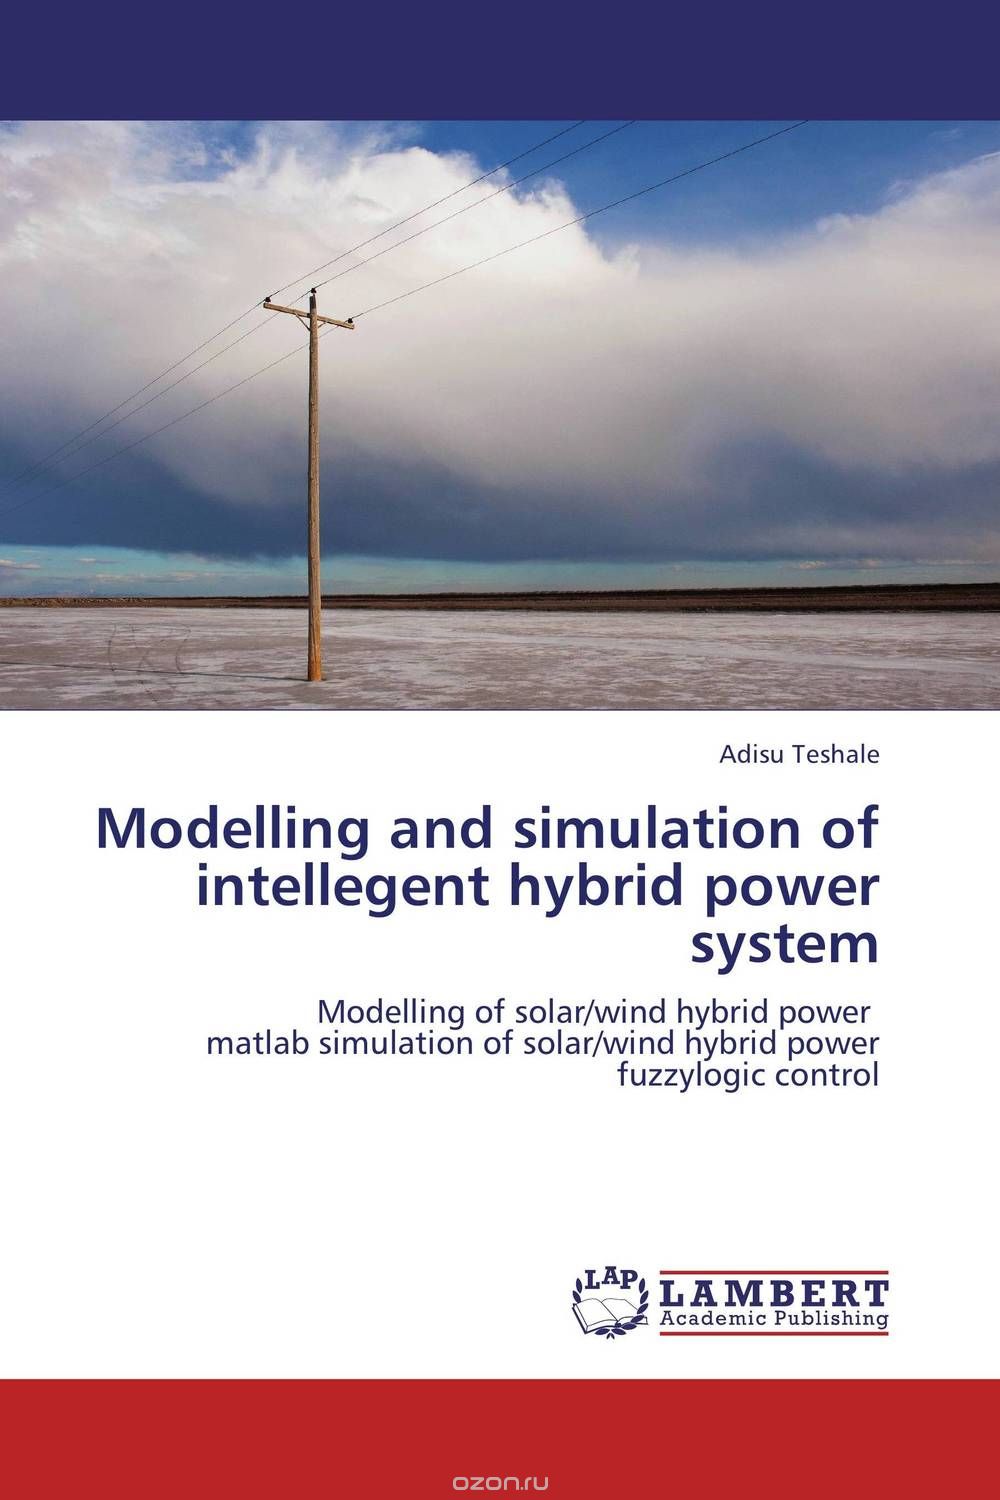 Modelling and simulation of intellegent hybrid power system